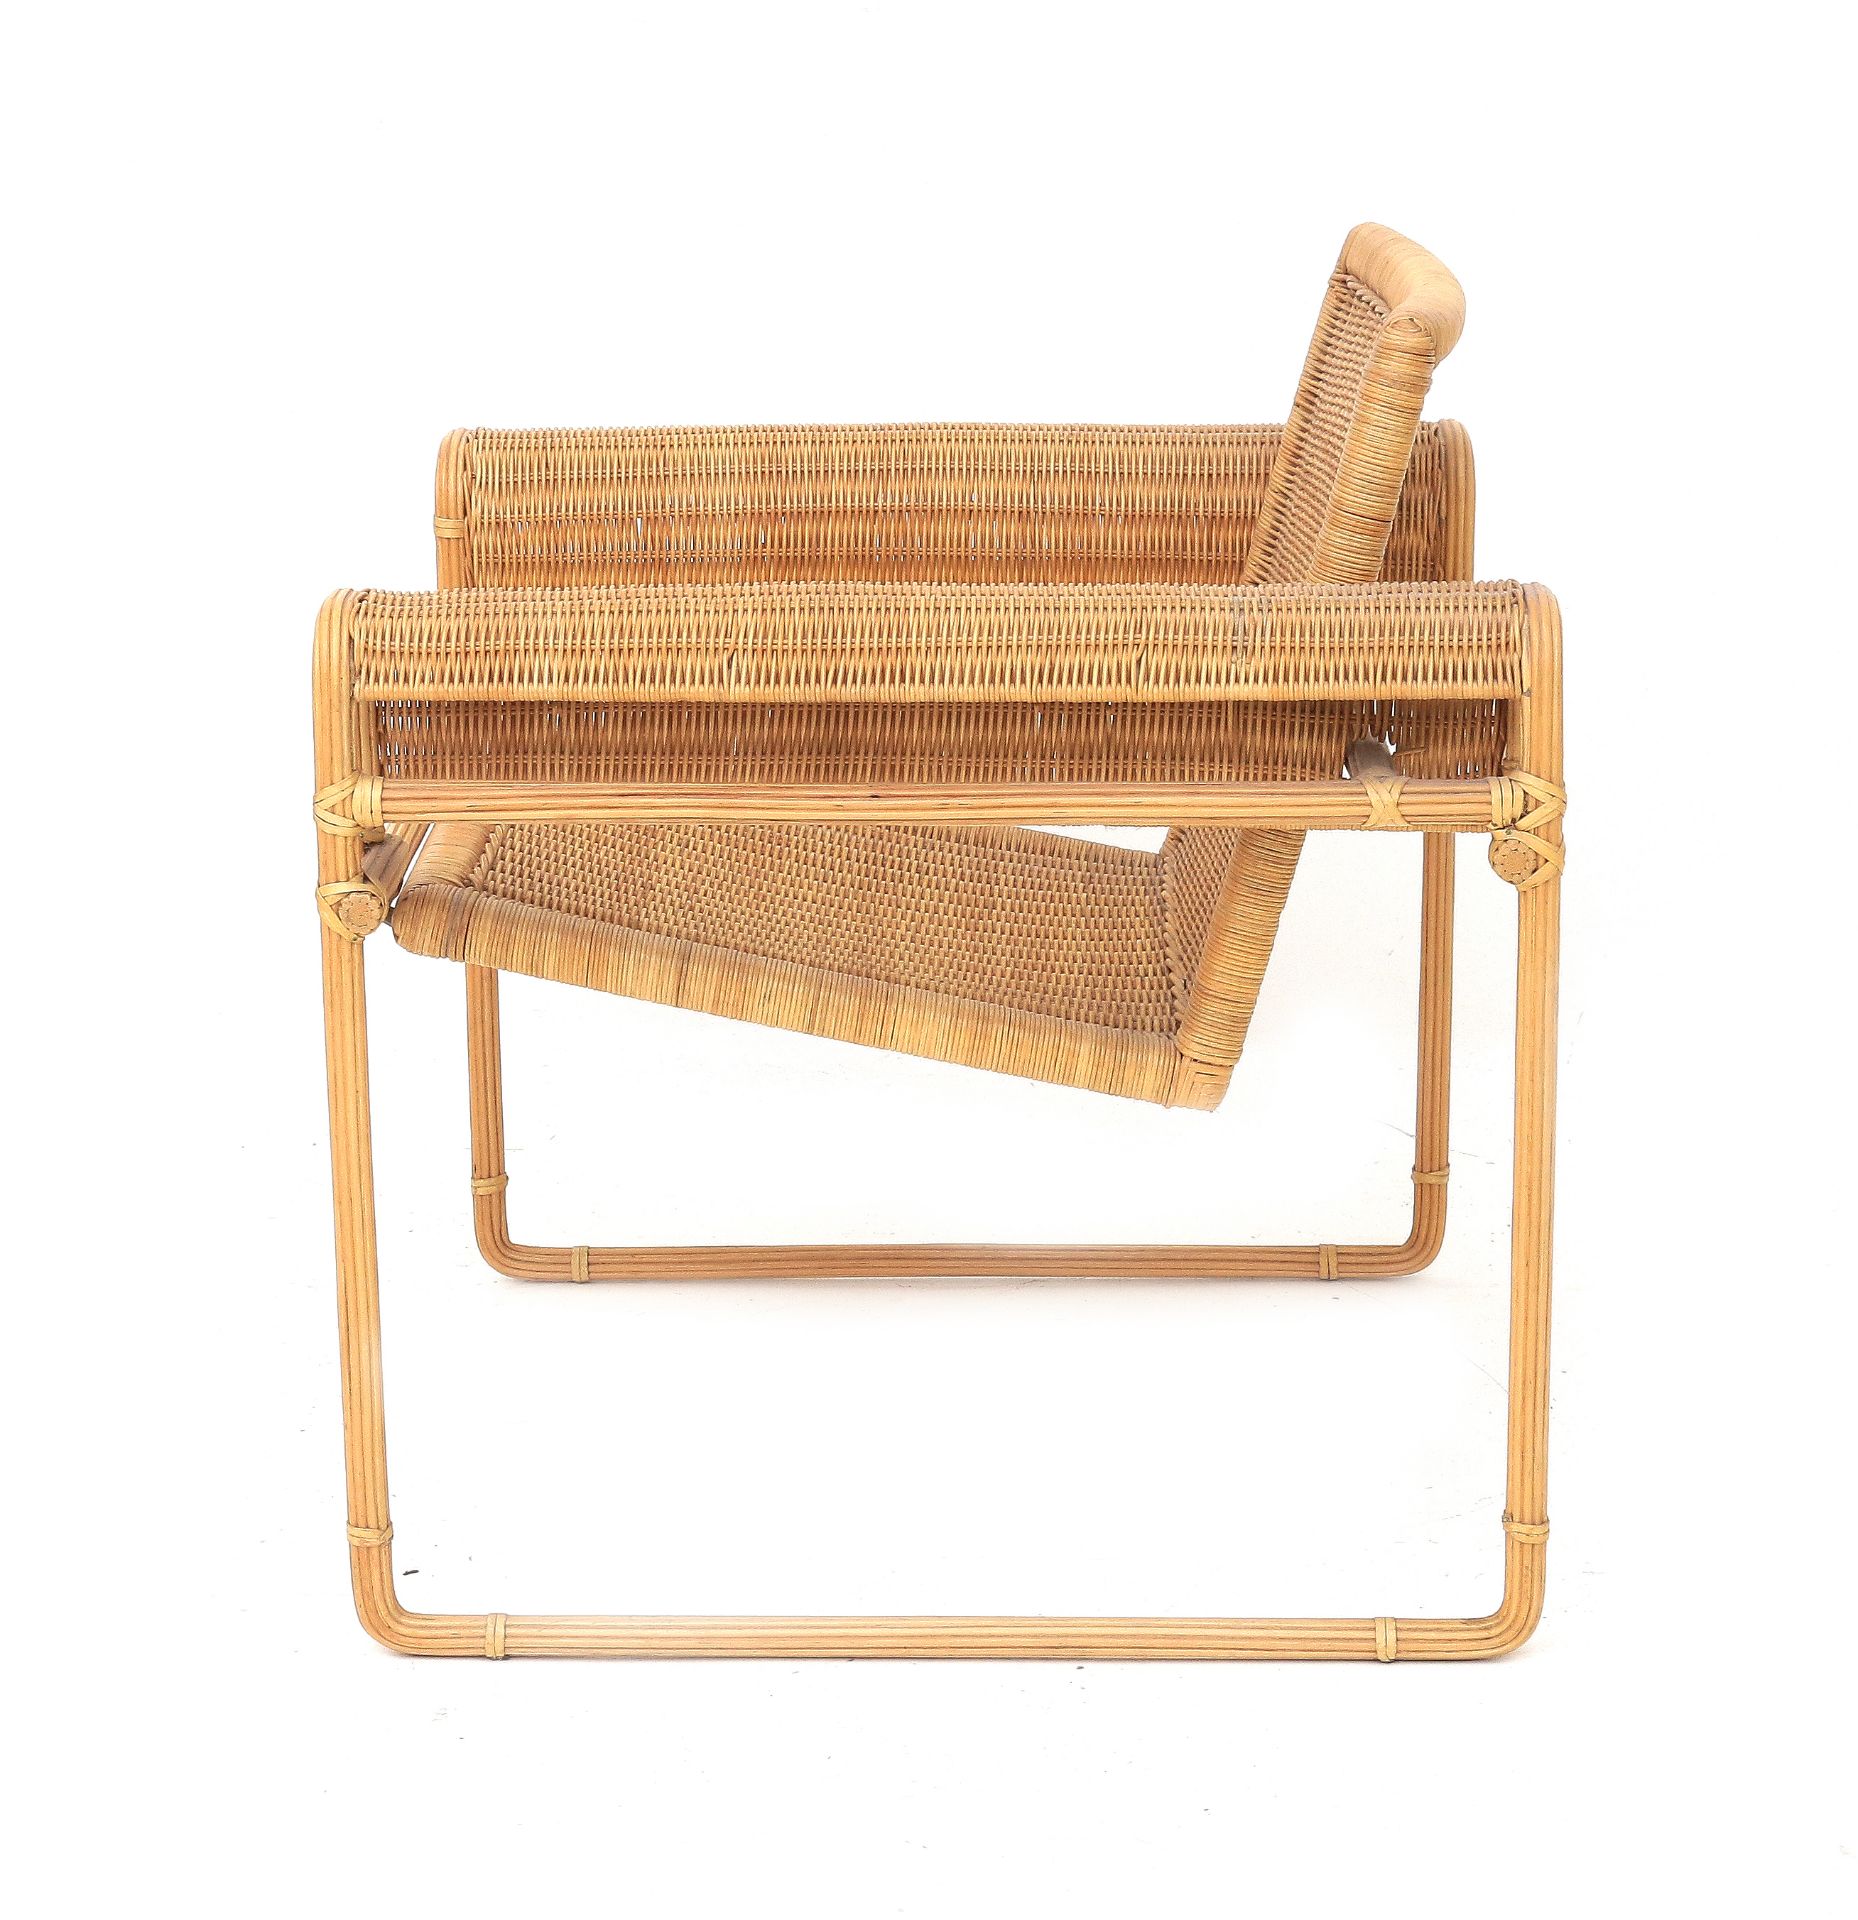 Marcel Breuer (1902-1981) (in the style of) A cane wickered armchair inspired by the Wassily - Bild 3 aus 3